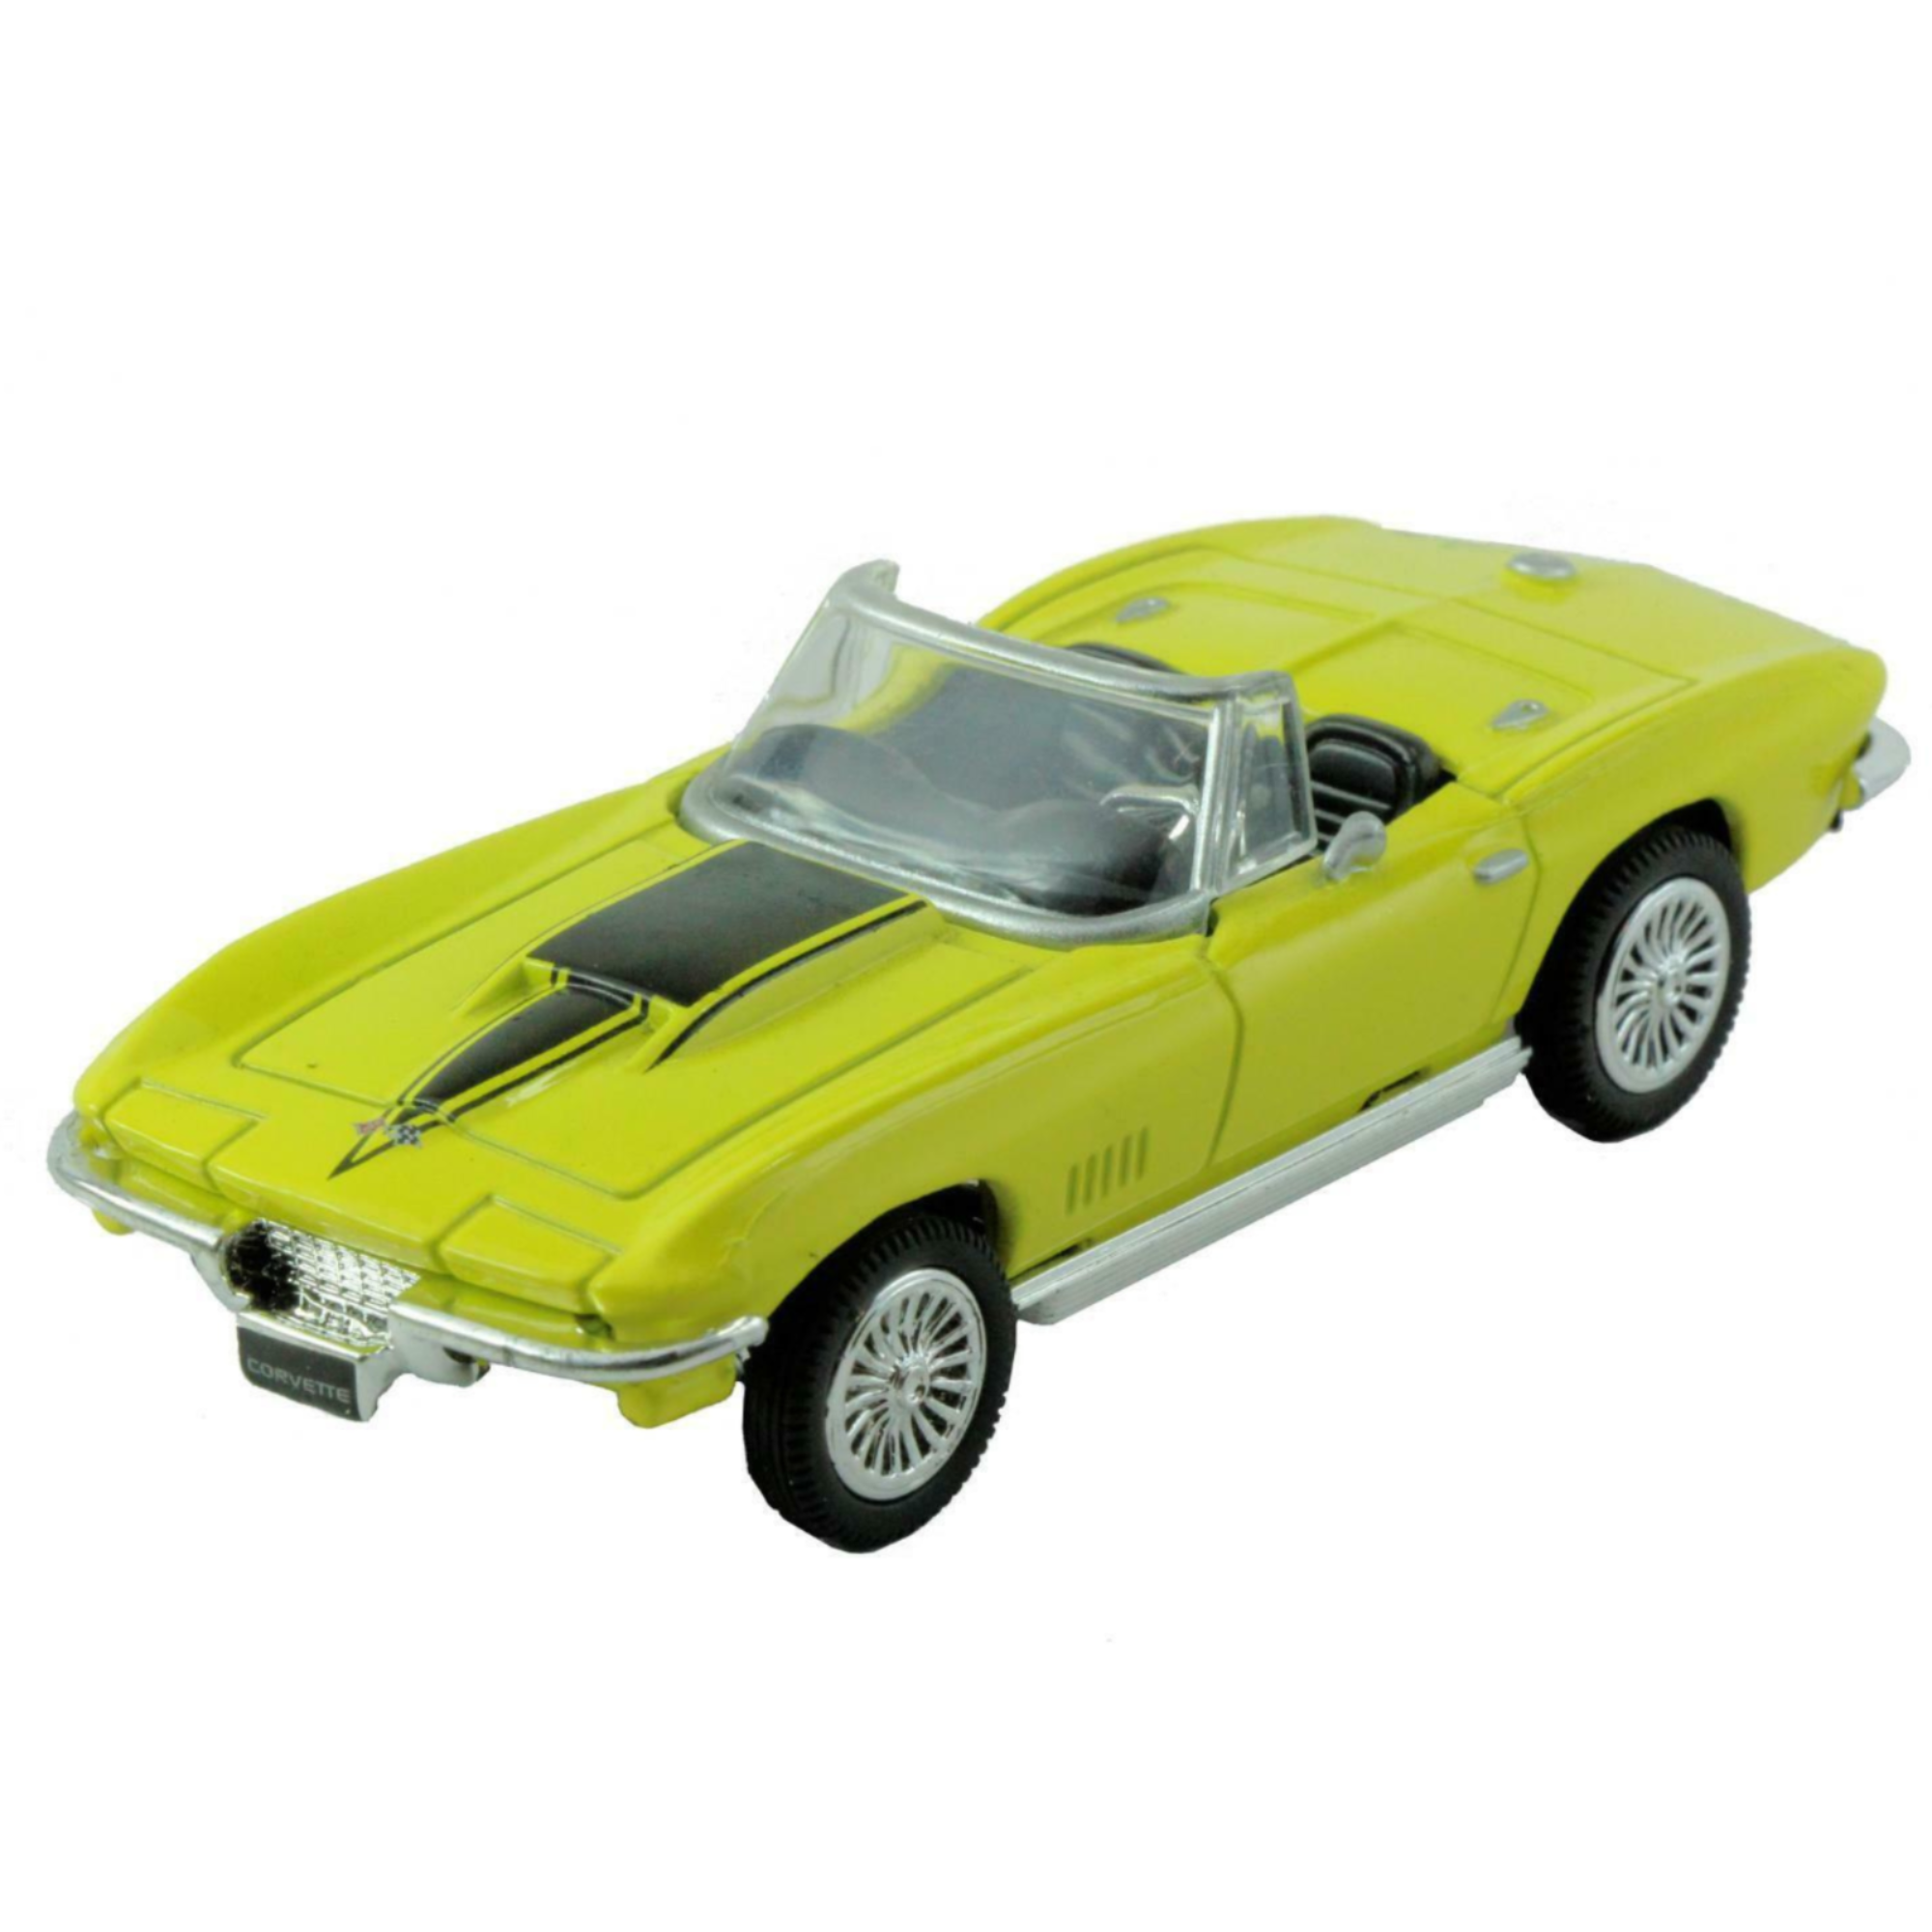 Corvette 1967 Convertible in Yellow - All American City Cruiser Collection 1:43 Diecast - Toptoys2u